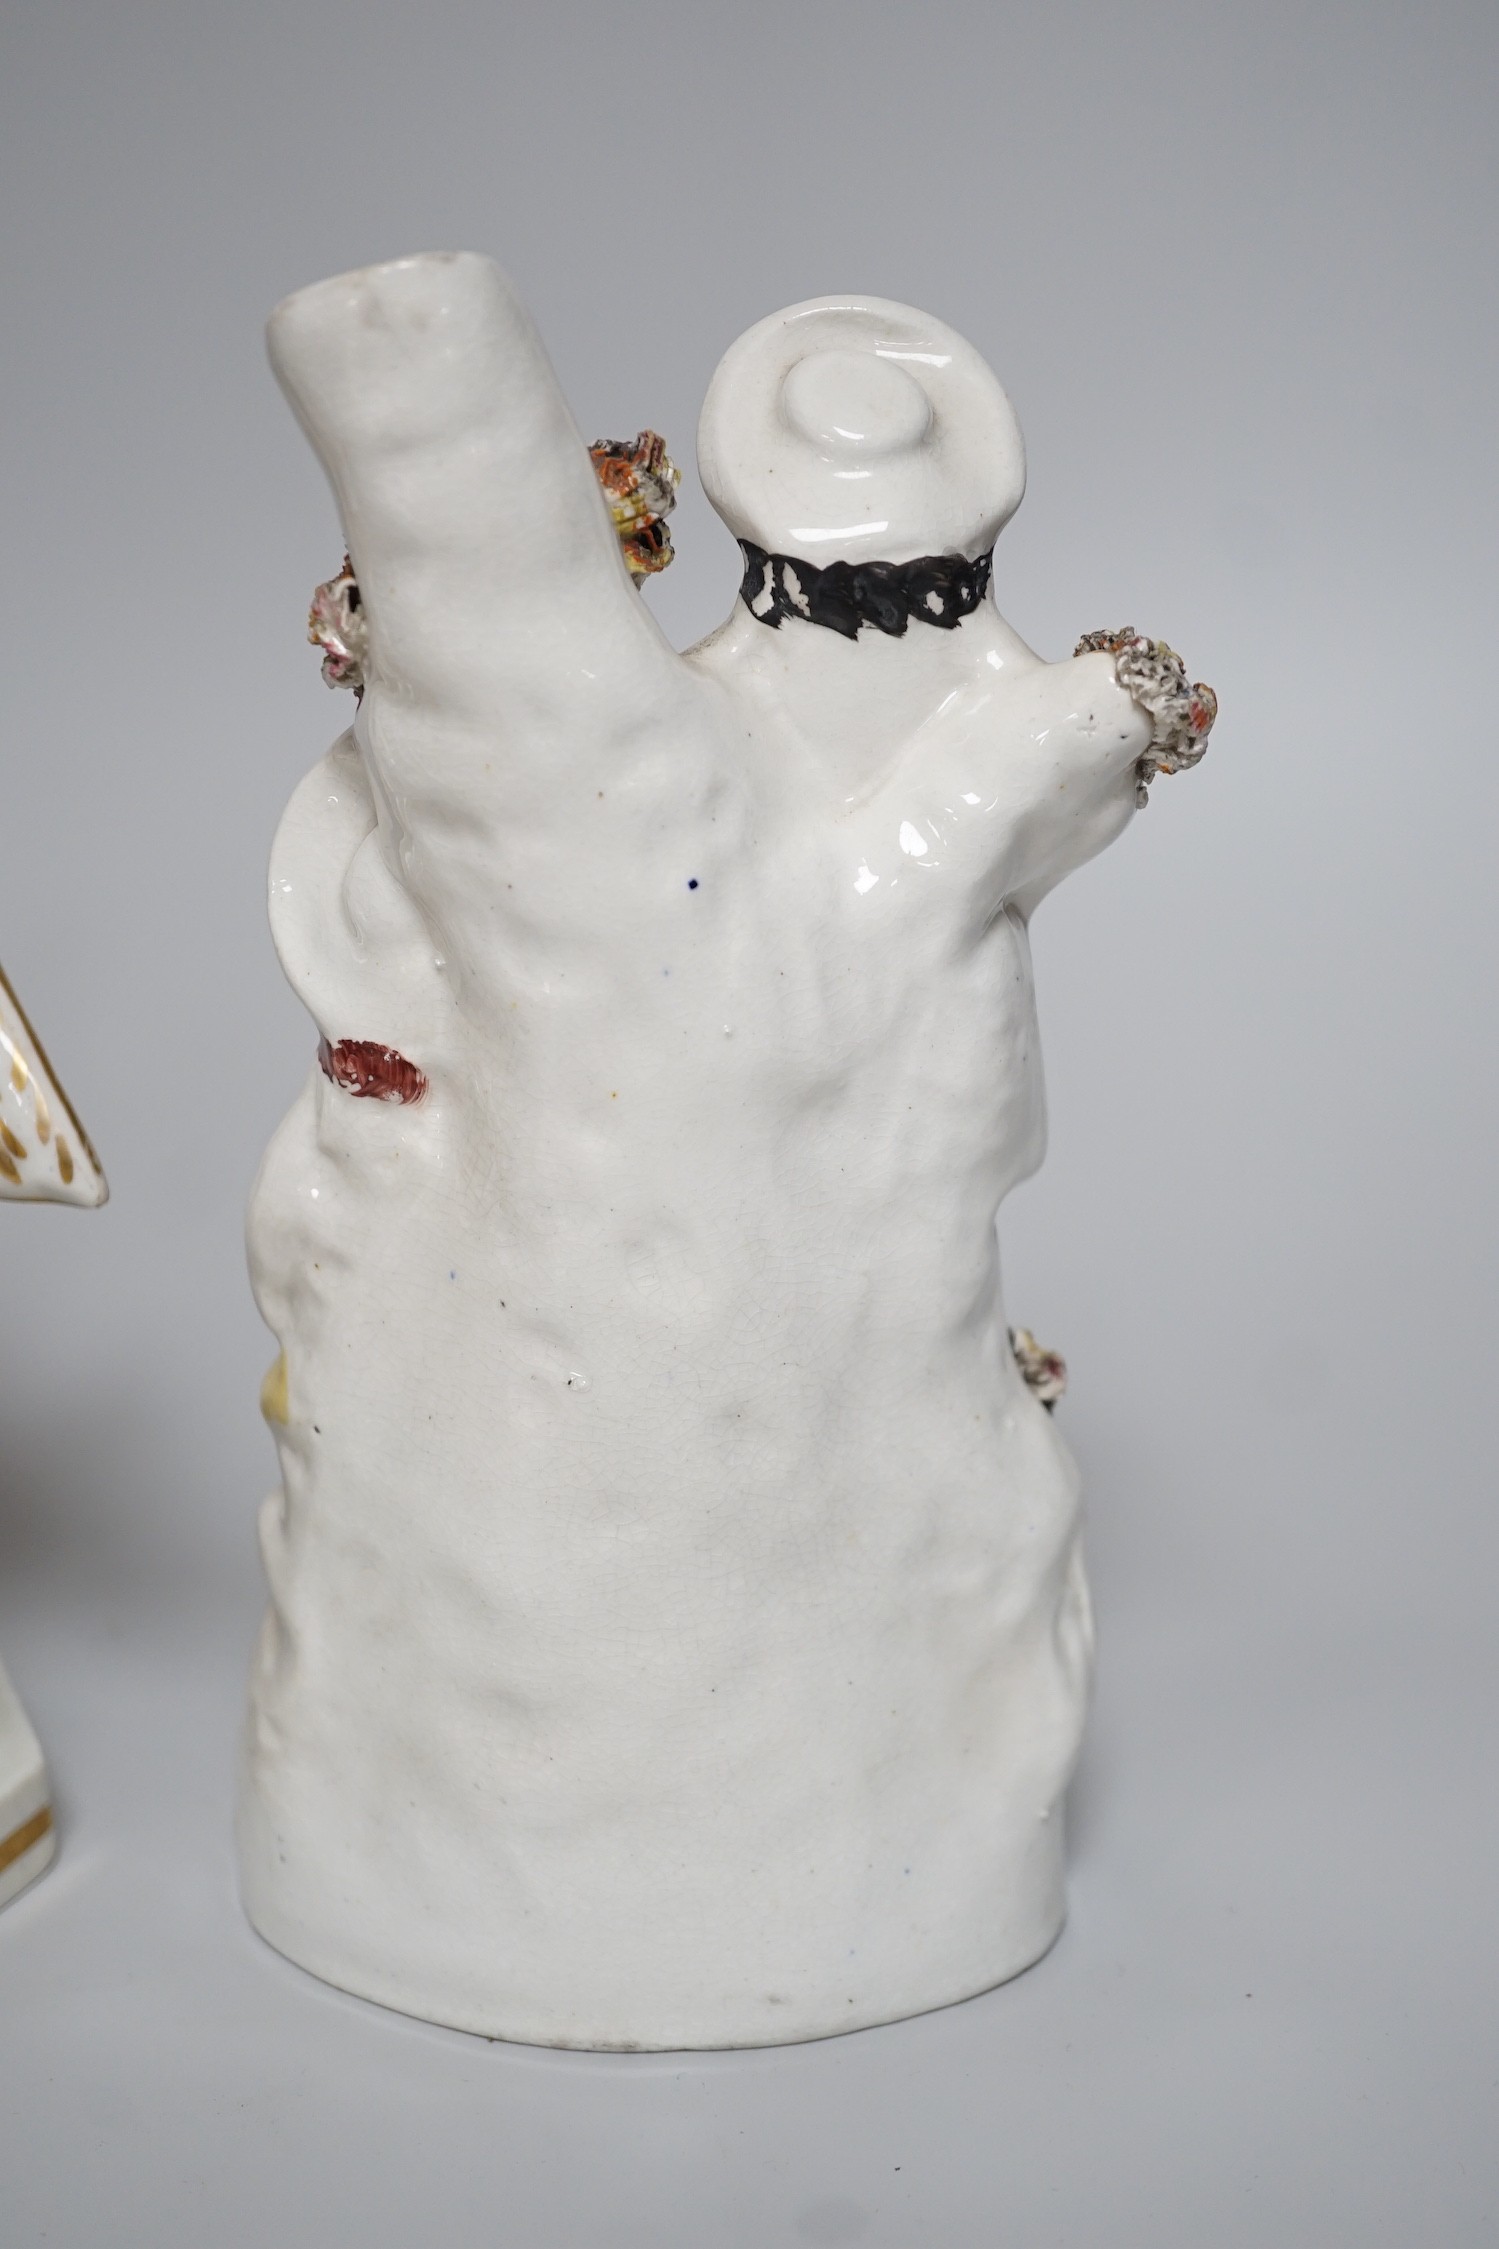 A Worcester milk jug, c.1780, a Newhall-type cream jug, c.1795, a Staffordshire porcelain model of an eagle, c.1830-40, 17cm high, and two Staffordshire porcellaneous models